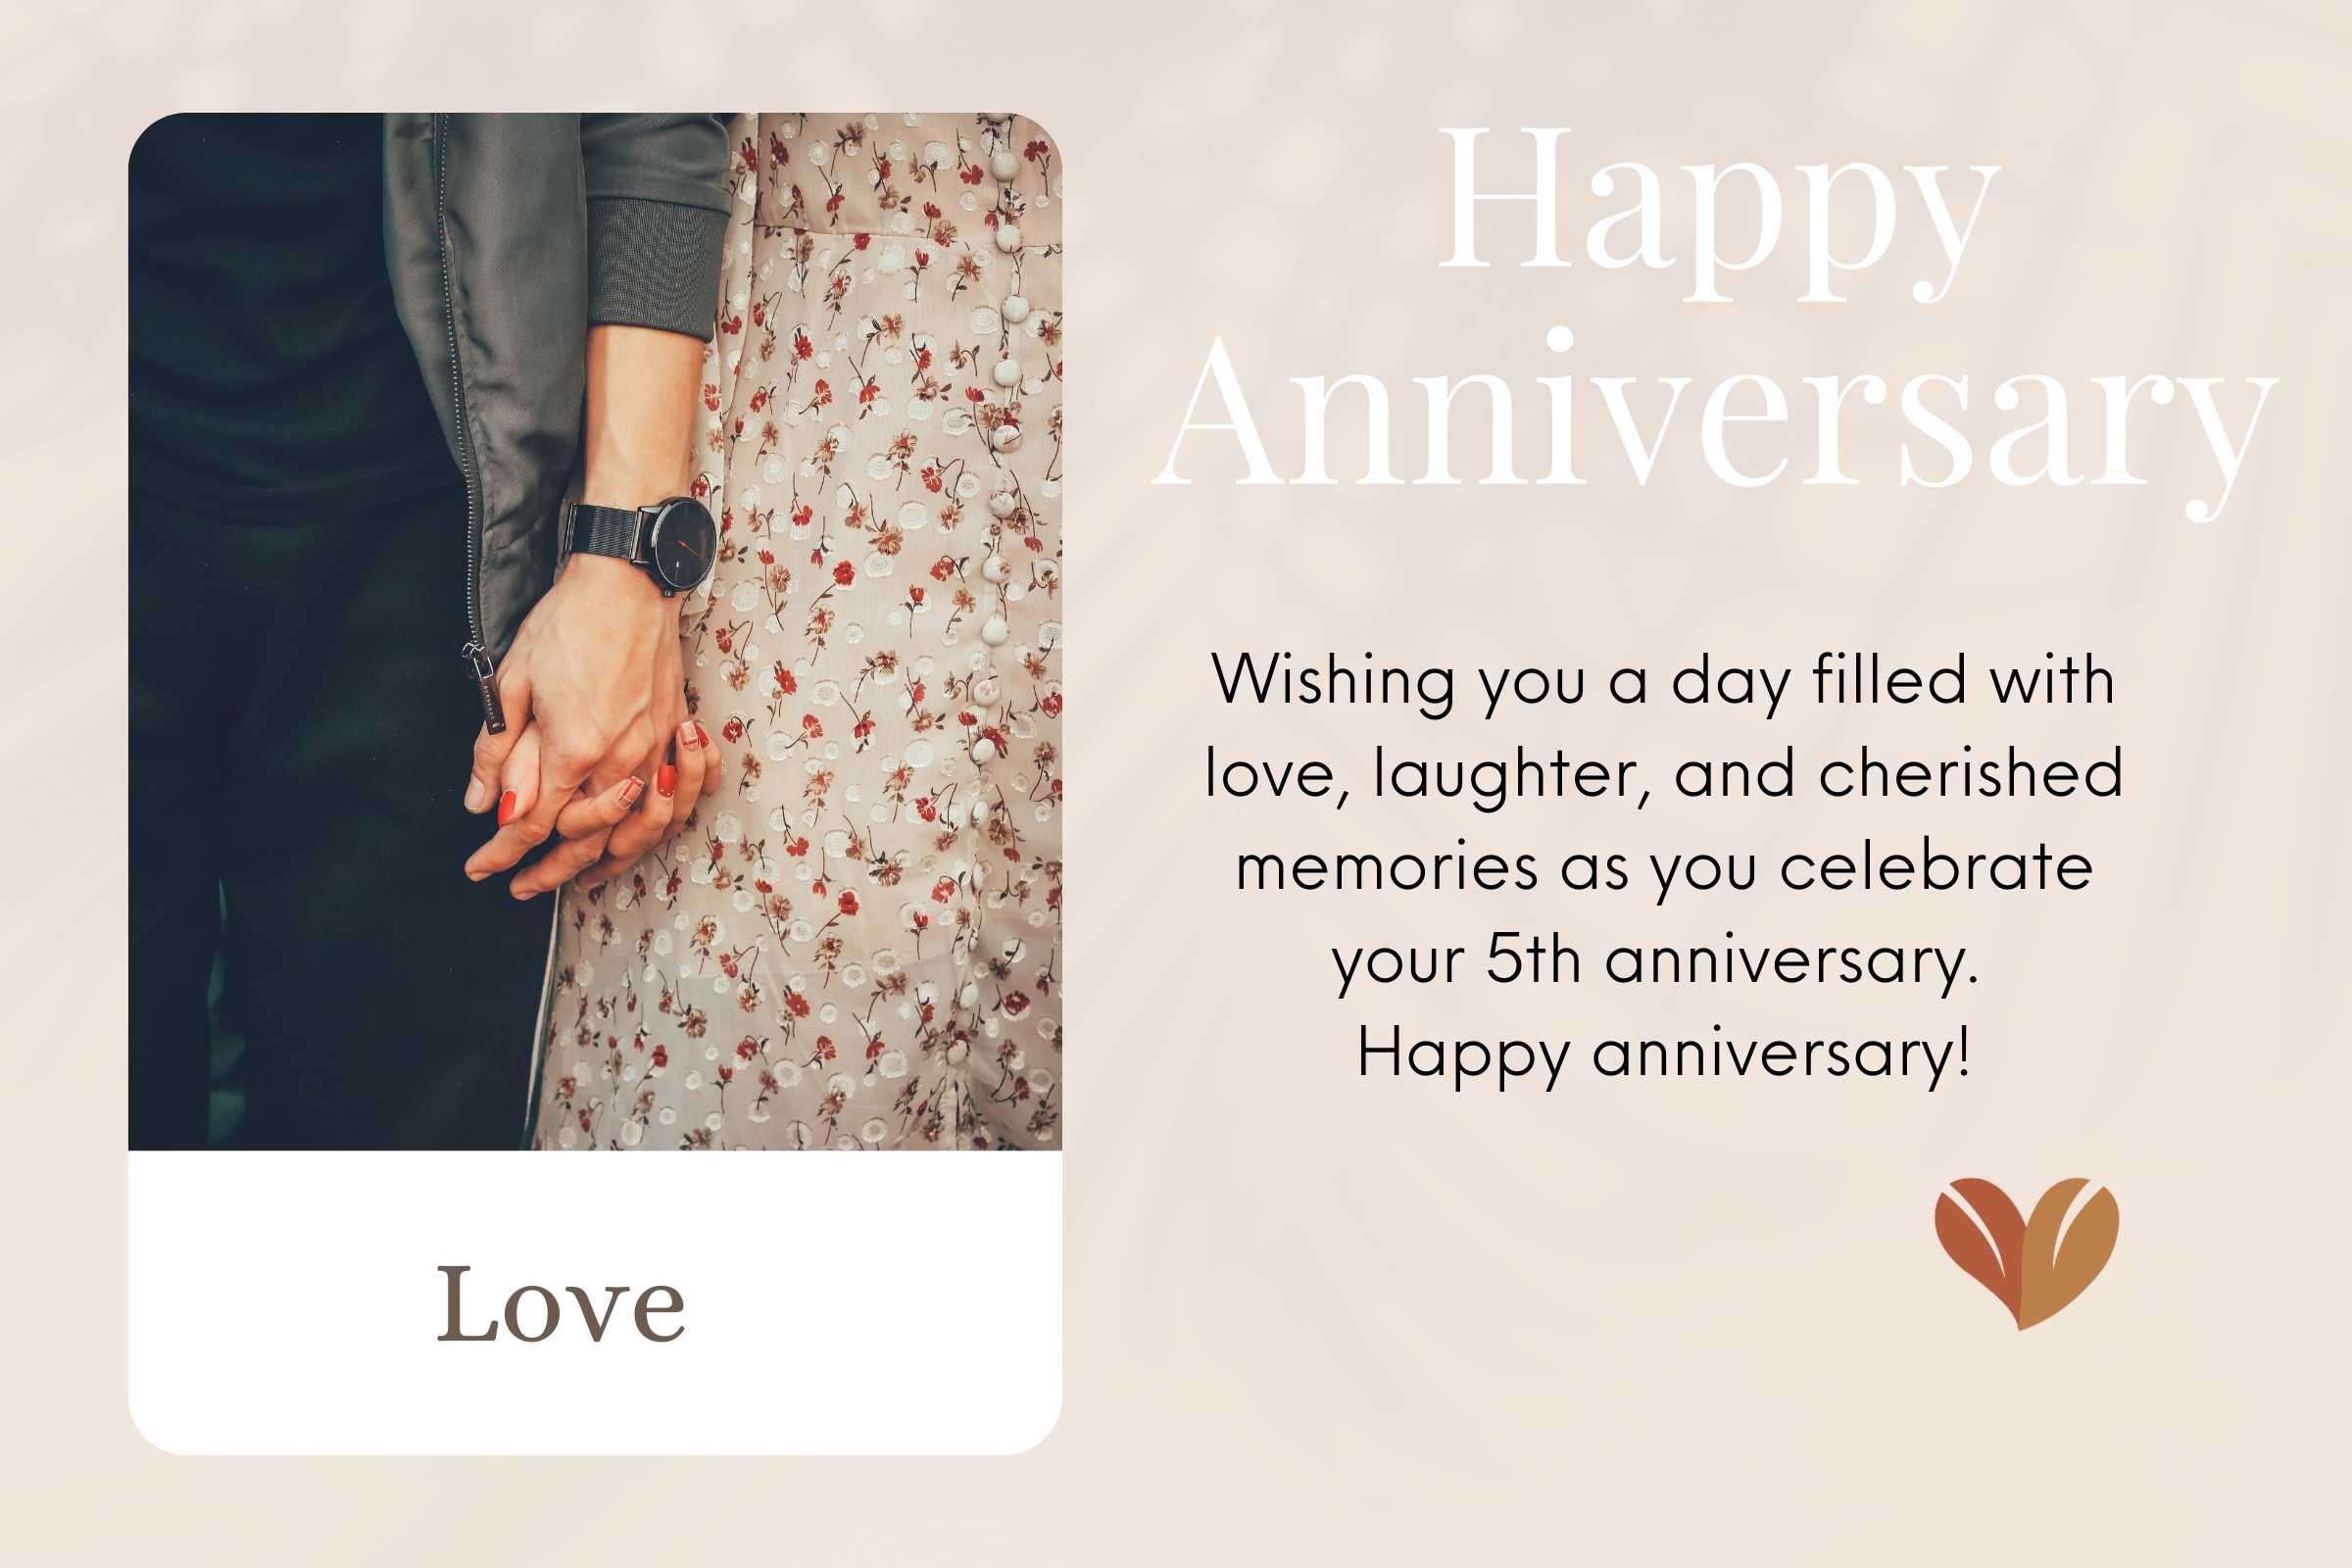 Five years of love and togetherness